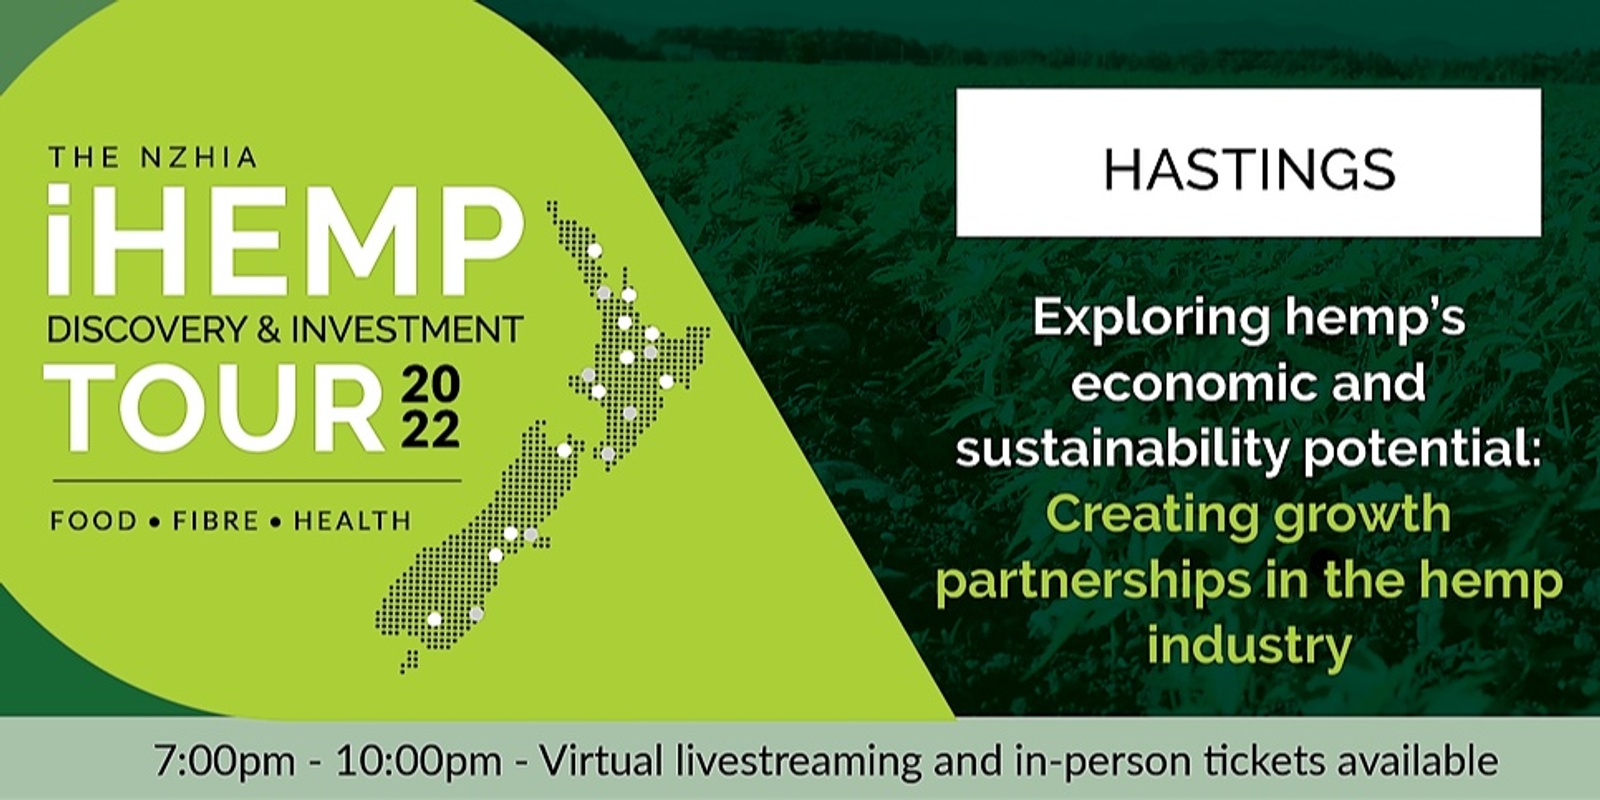 Banner image for HASTINGS: Creating growth partnerships in the hemp industry